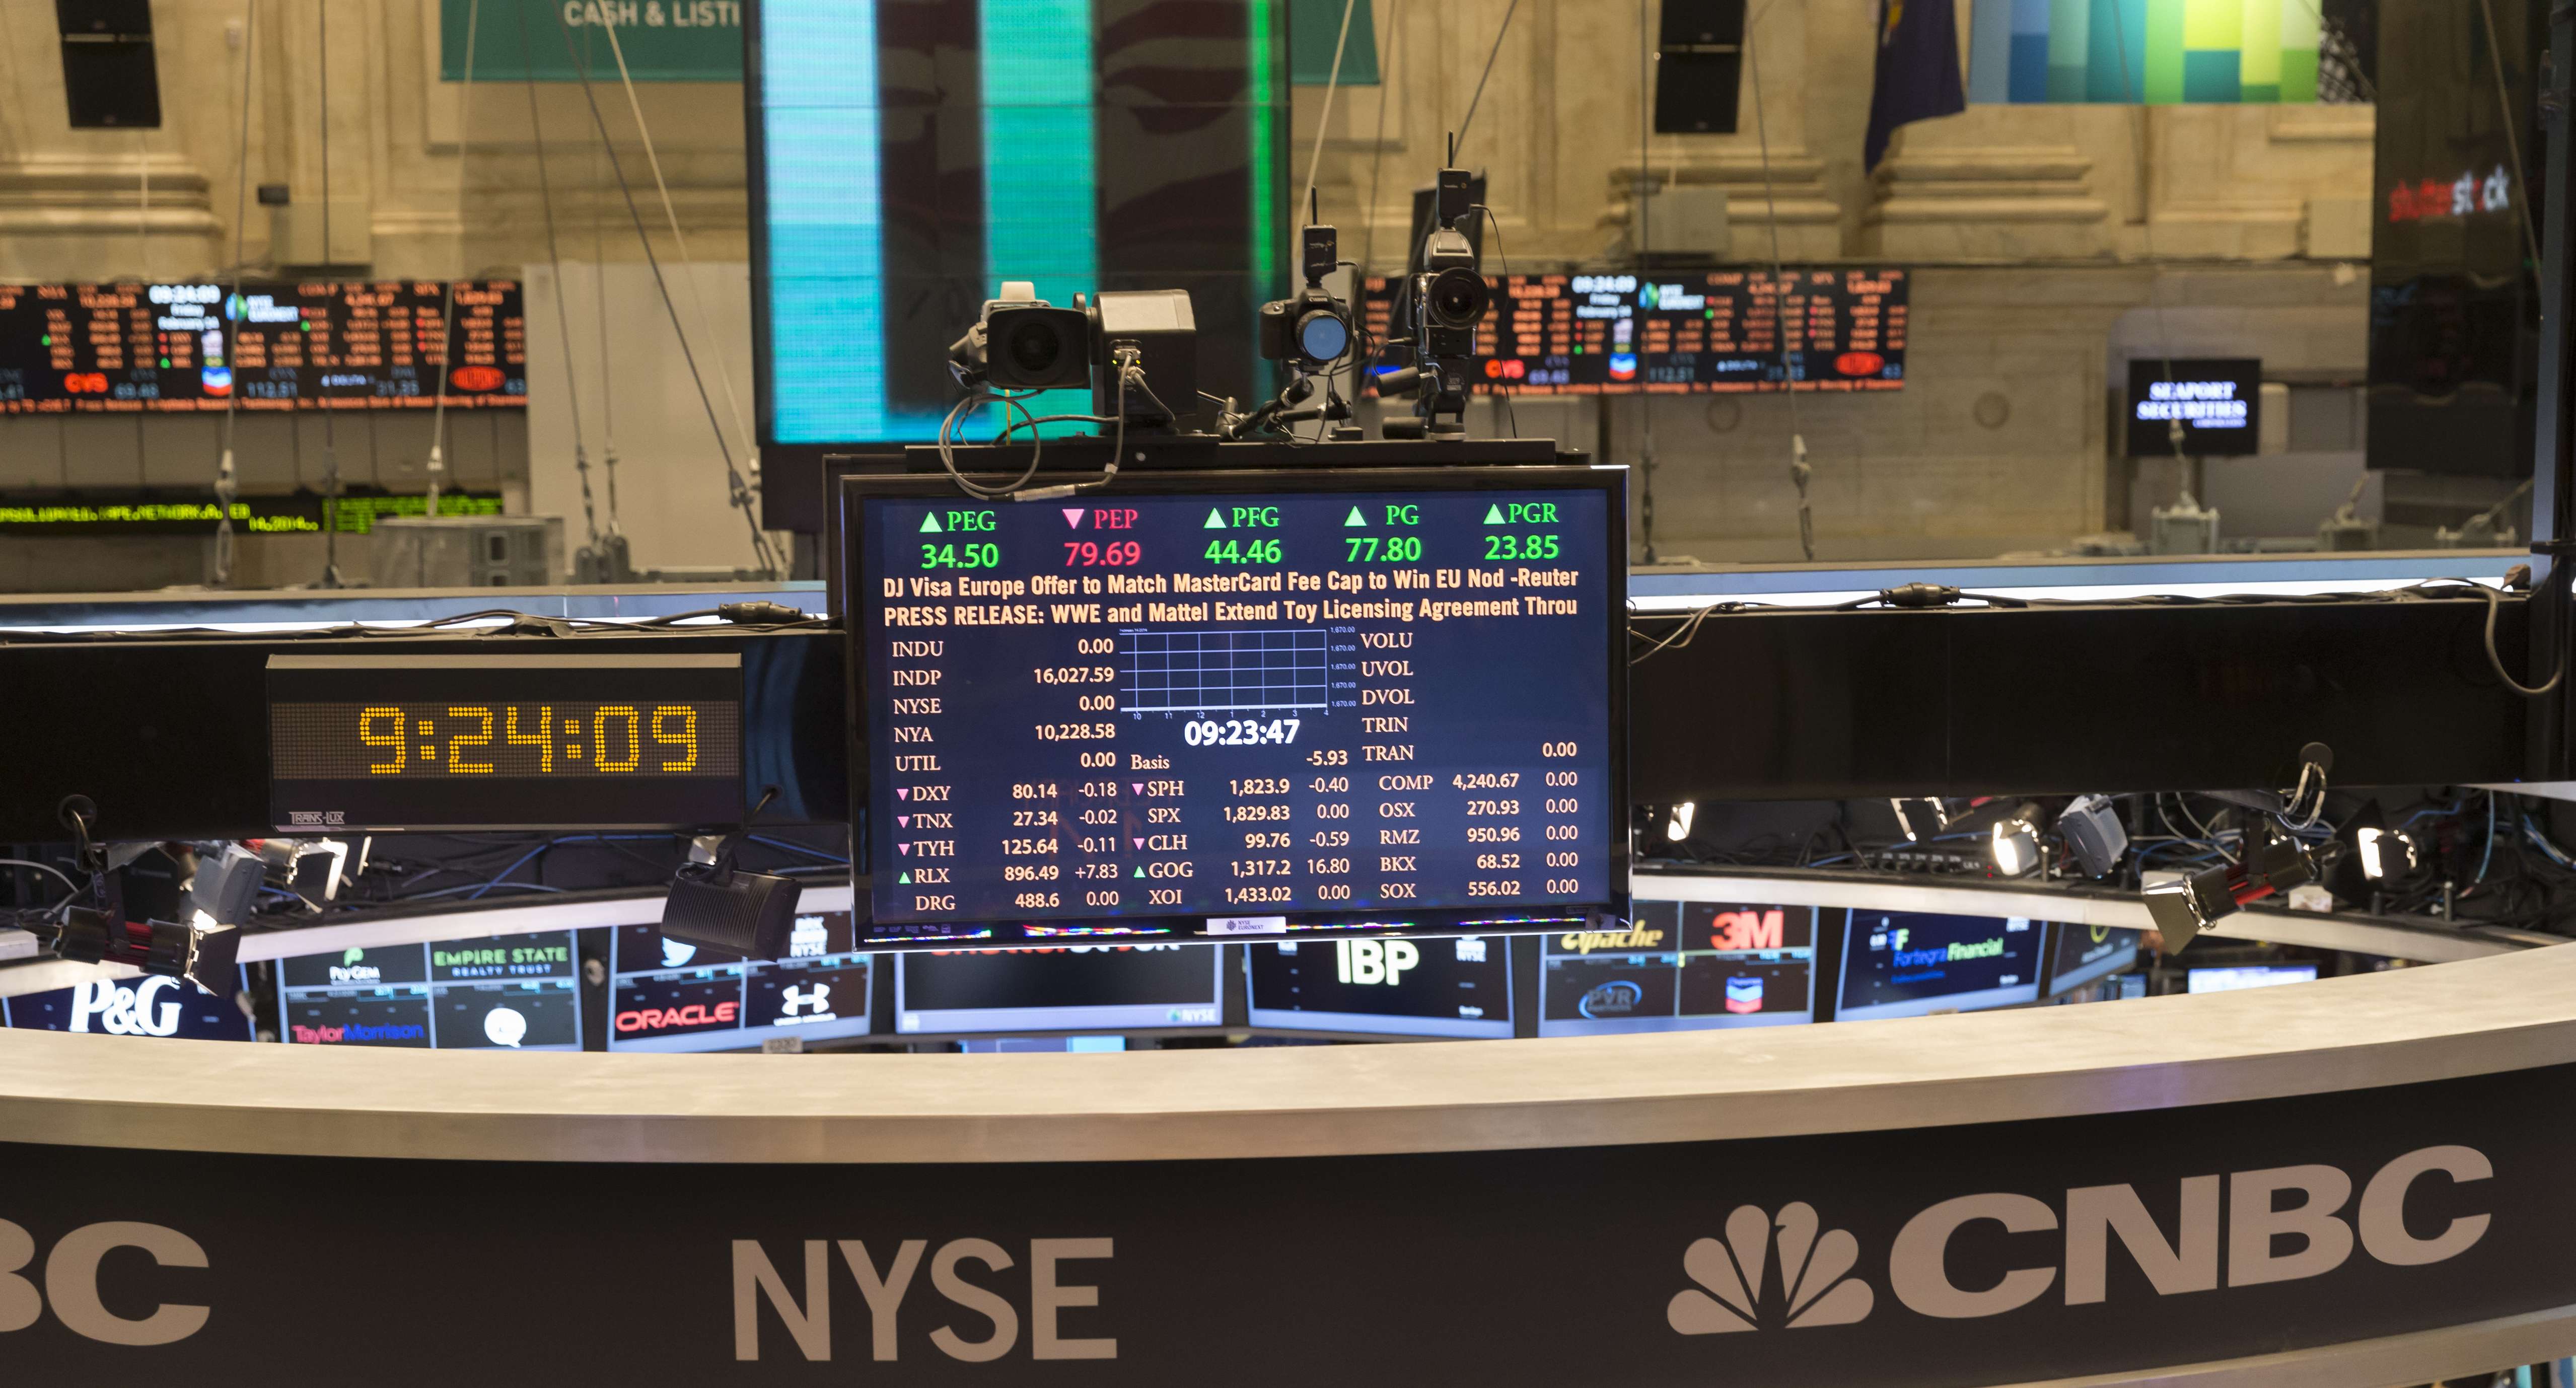 Inside view of the NYSE trading floor